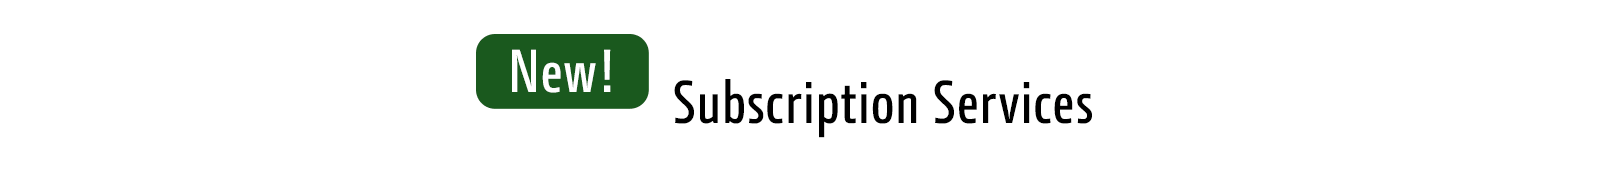 Introducing Subscription Services